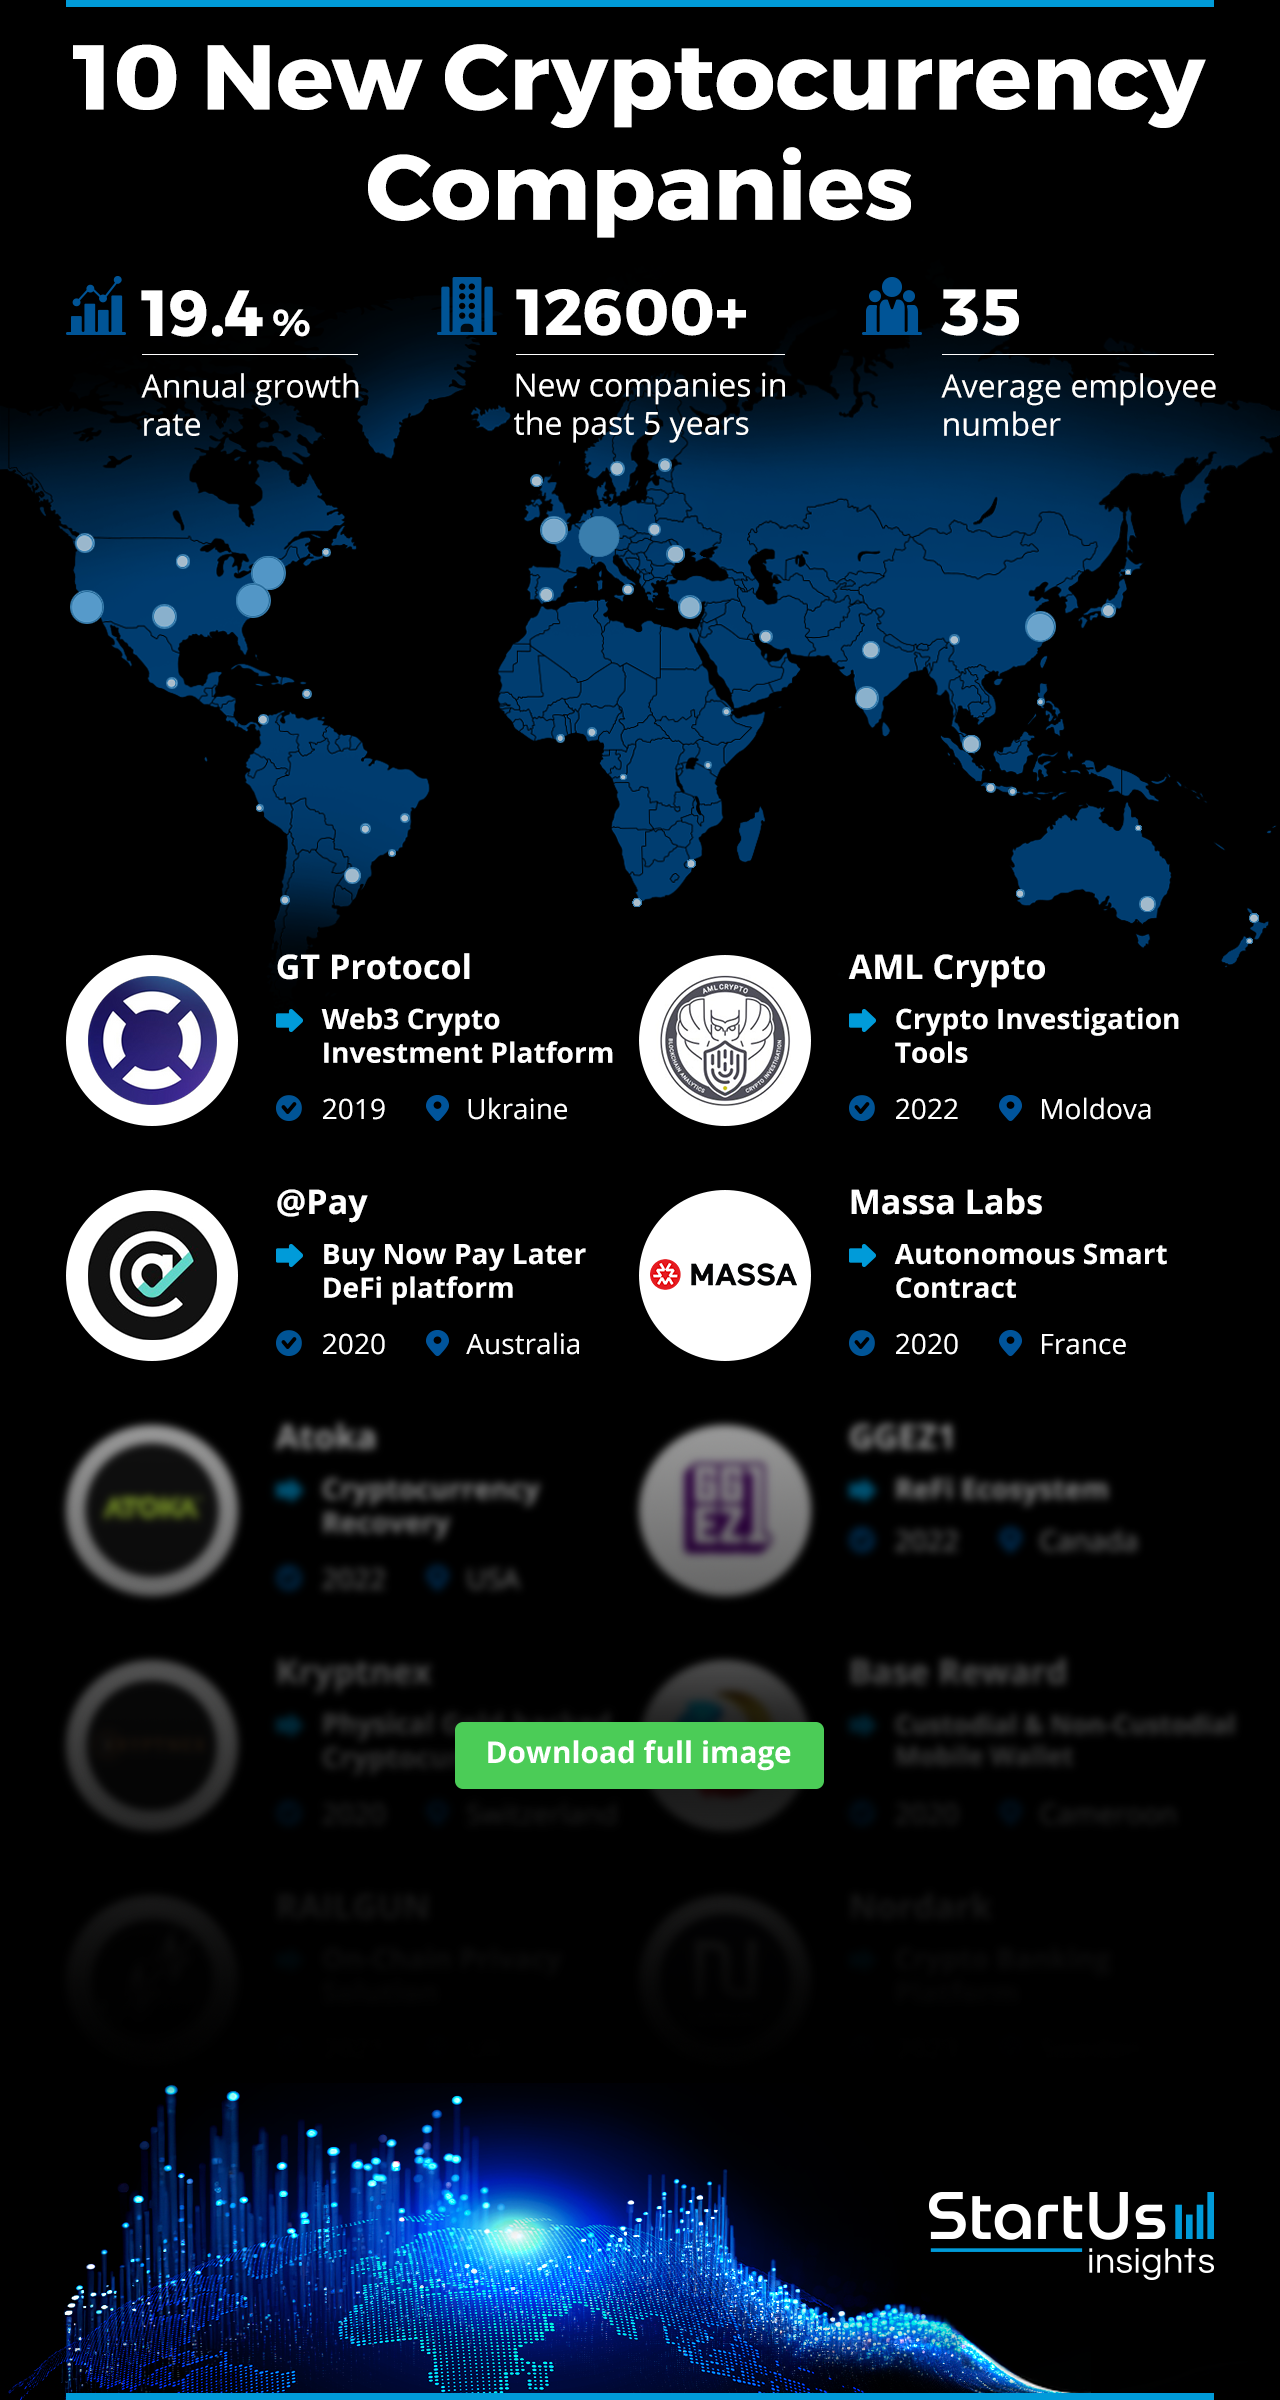 New-Cryptocurrency-Companies-Logos-Blurred-StartUs-Insights-noresize